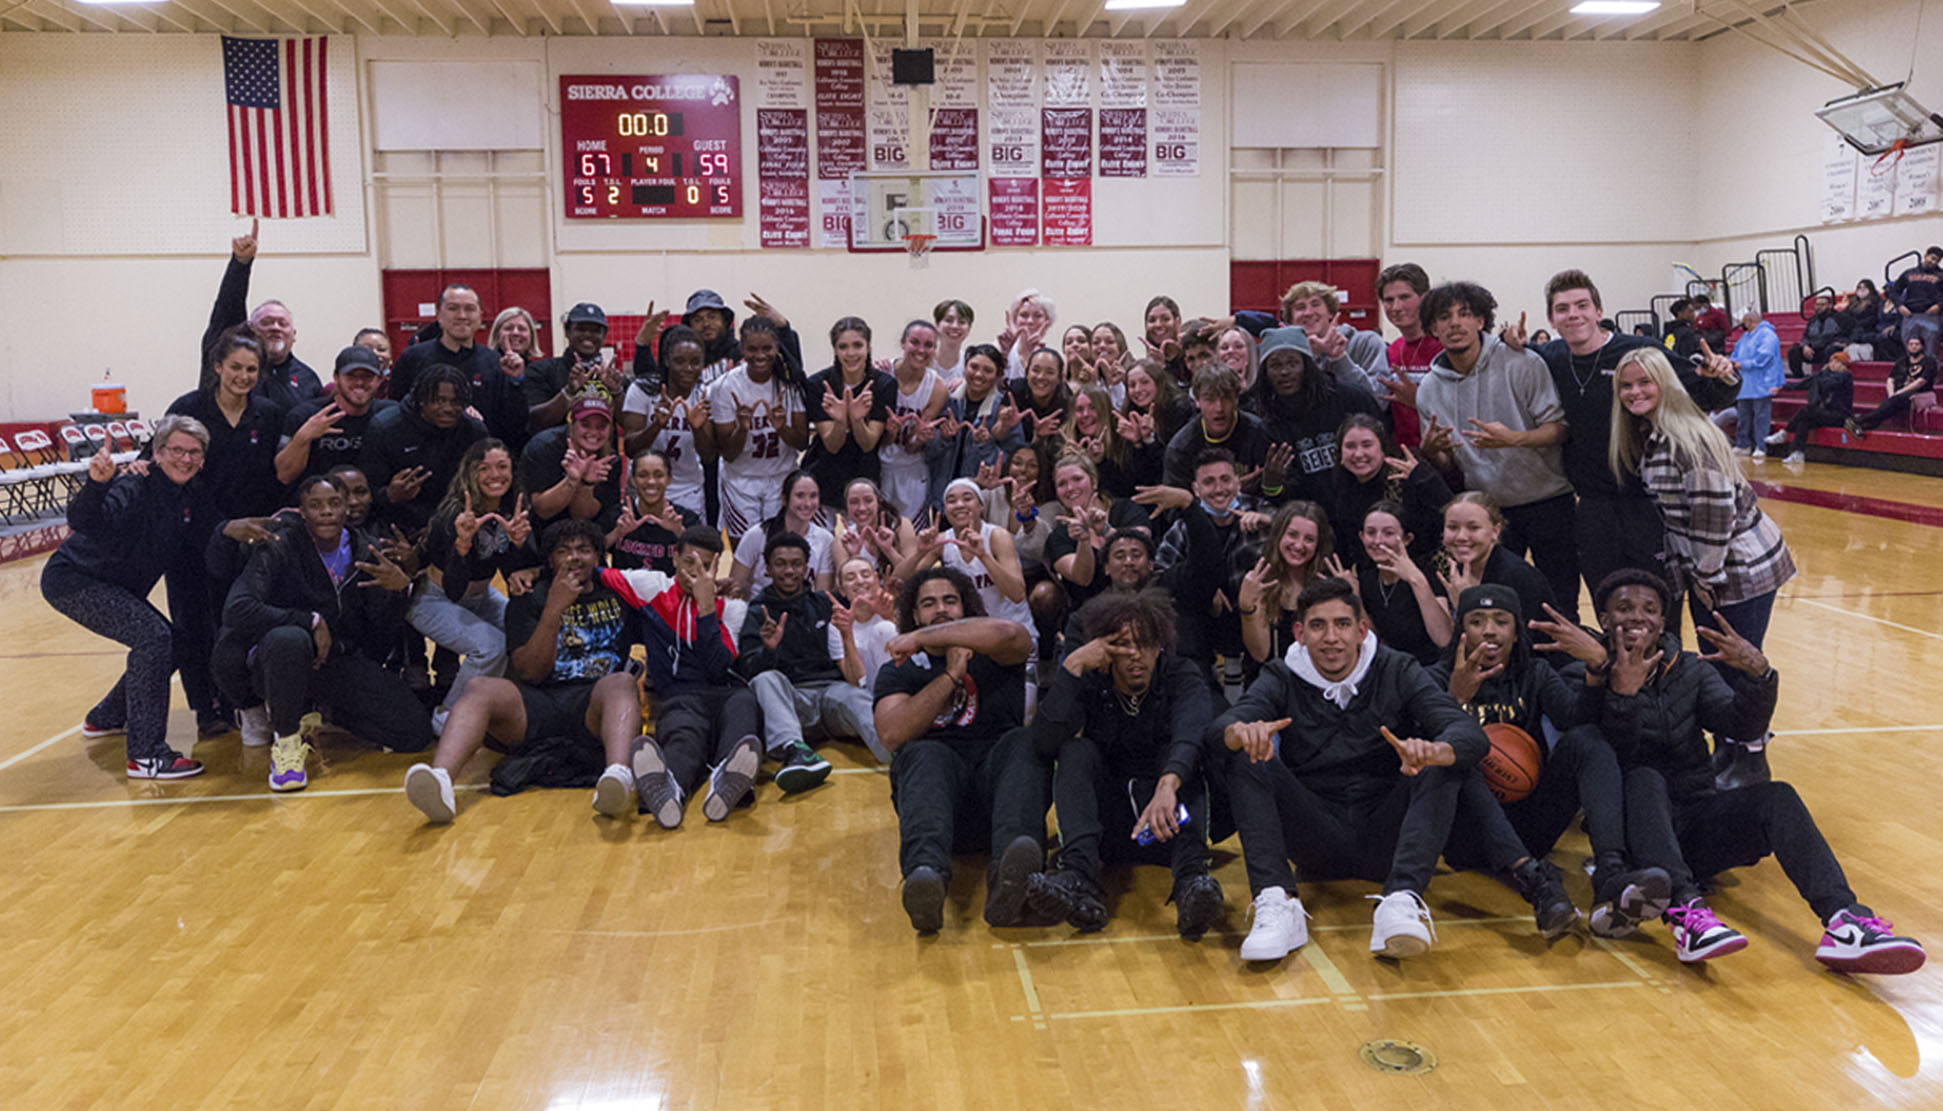 Sierra Women's Basketball team and fans celebrate after a 67-59 win over Merced that sent Sierra to the 2022 State Championship.